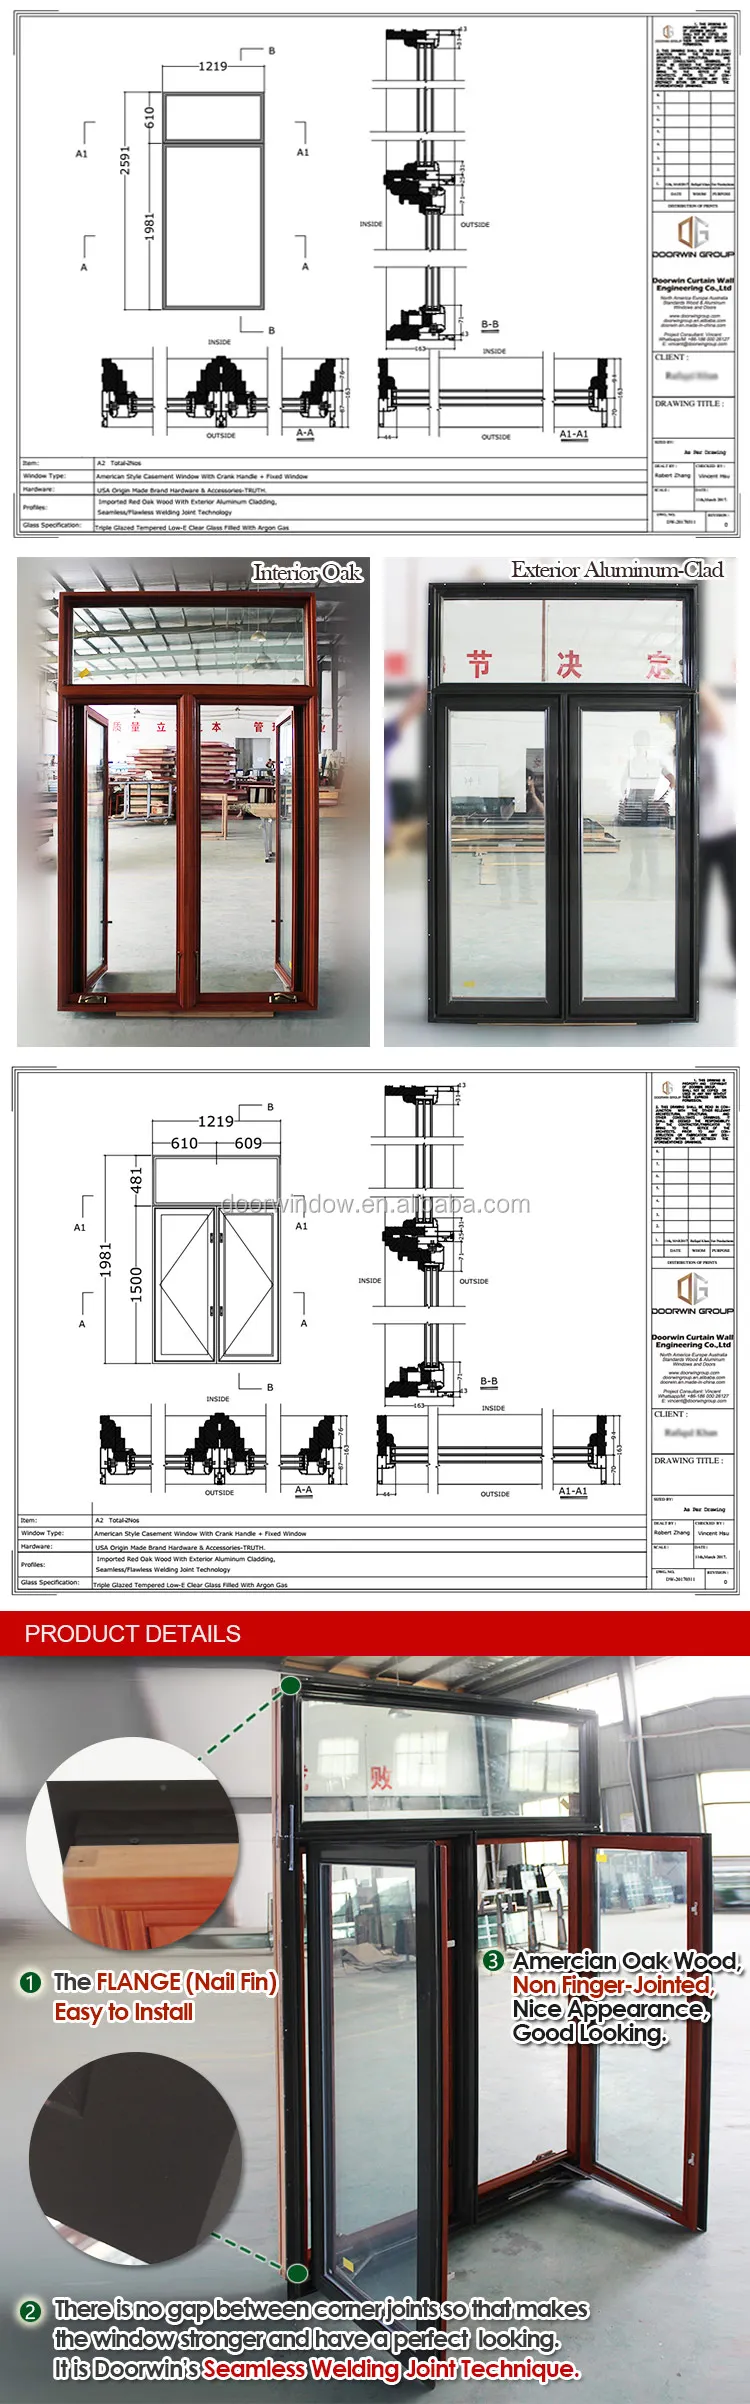 Sound insulation 6 glass panels foldable crank handle casement window with 2 glass panels arched top design window